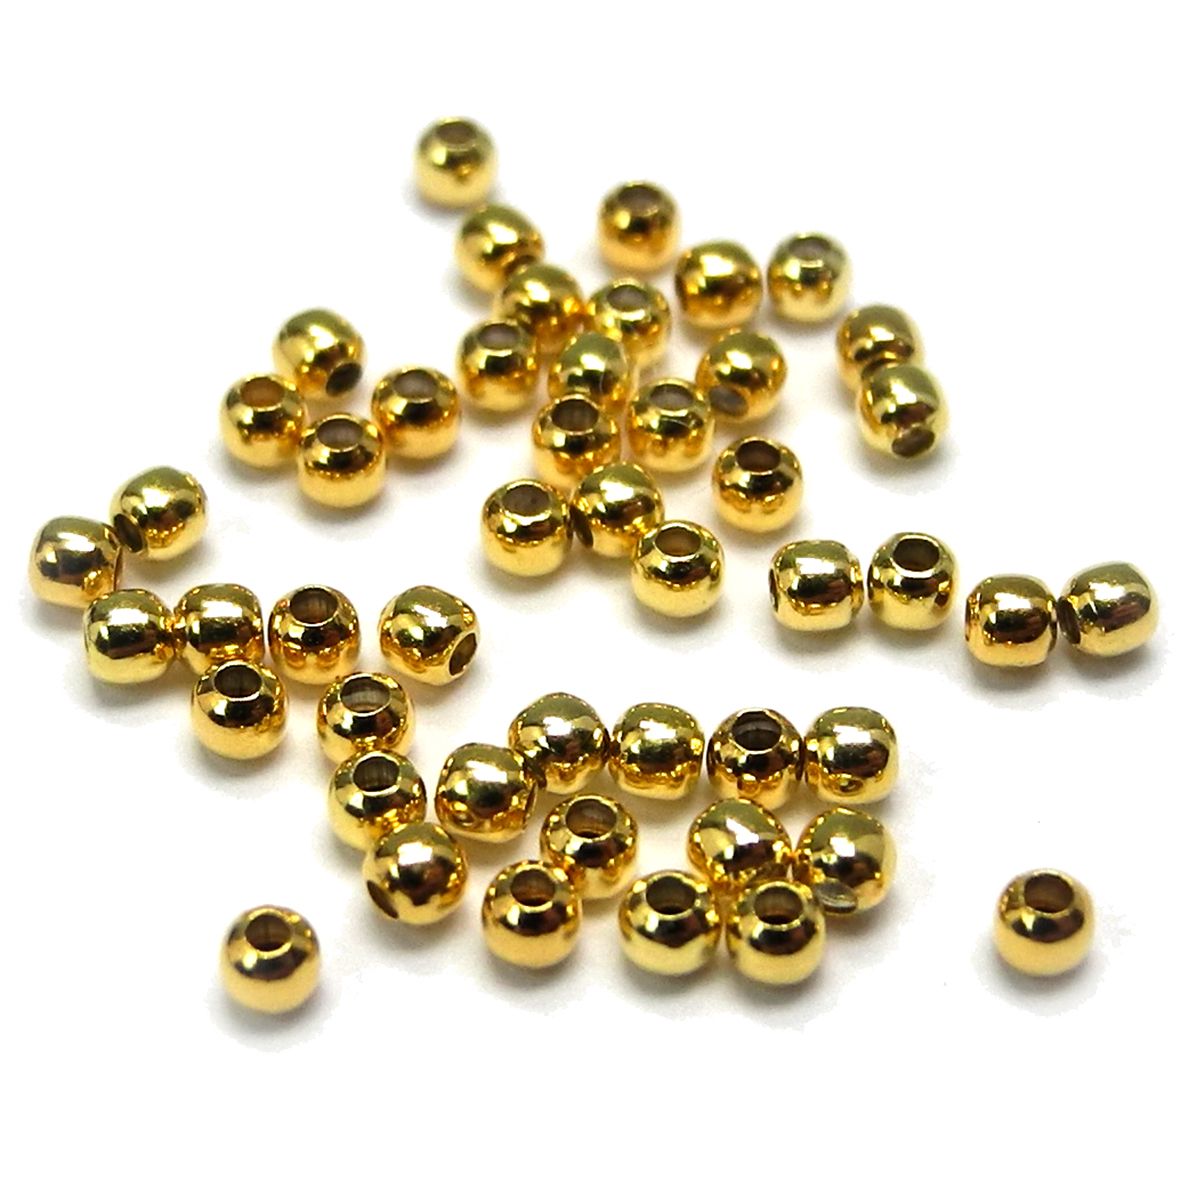 Crimp beads, gold-plated sterling silver, 2x1mm, 10pcs.